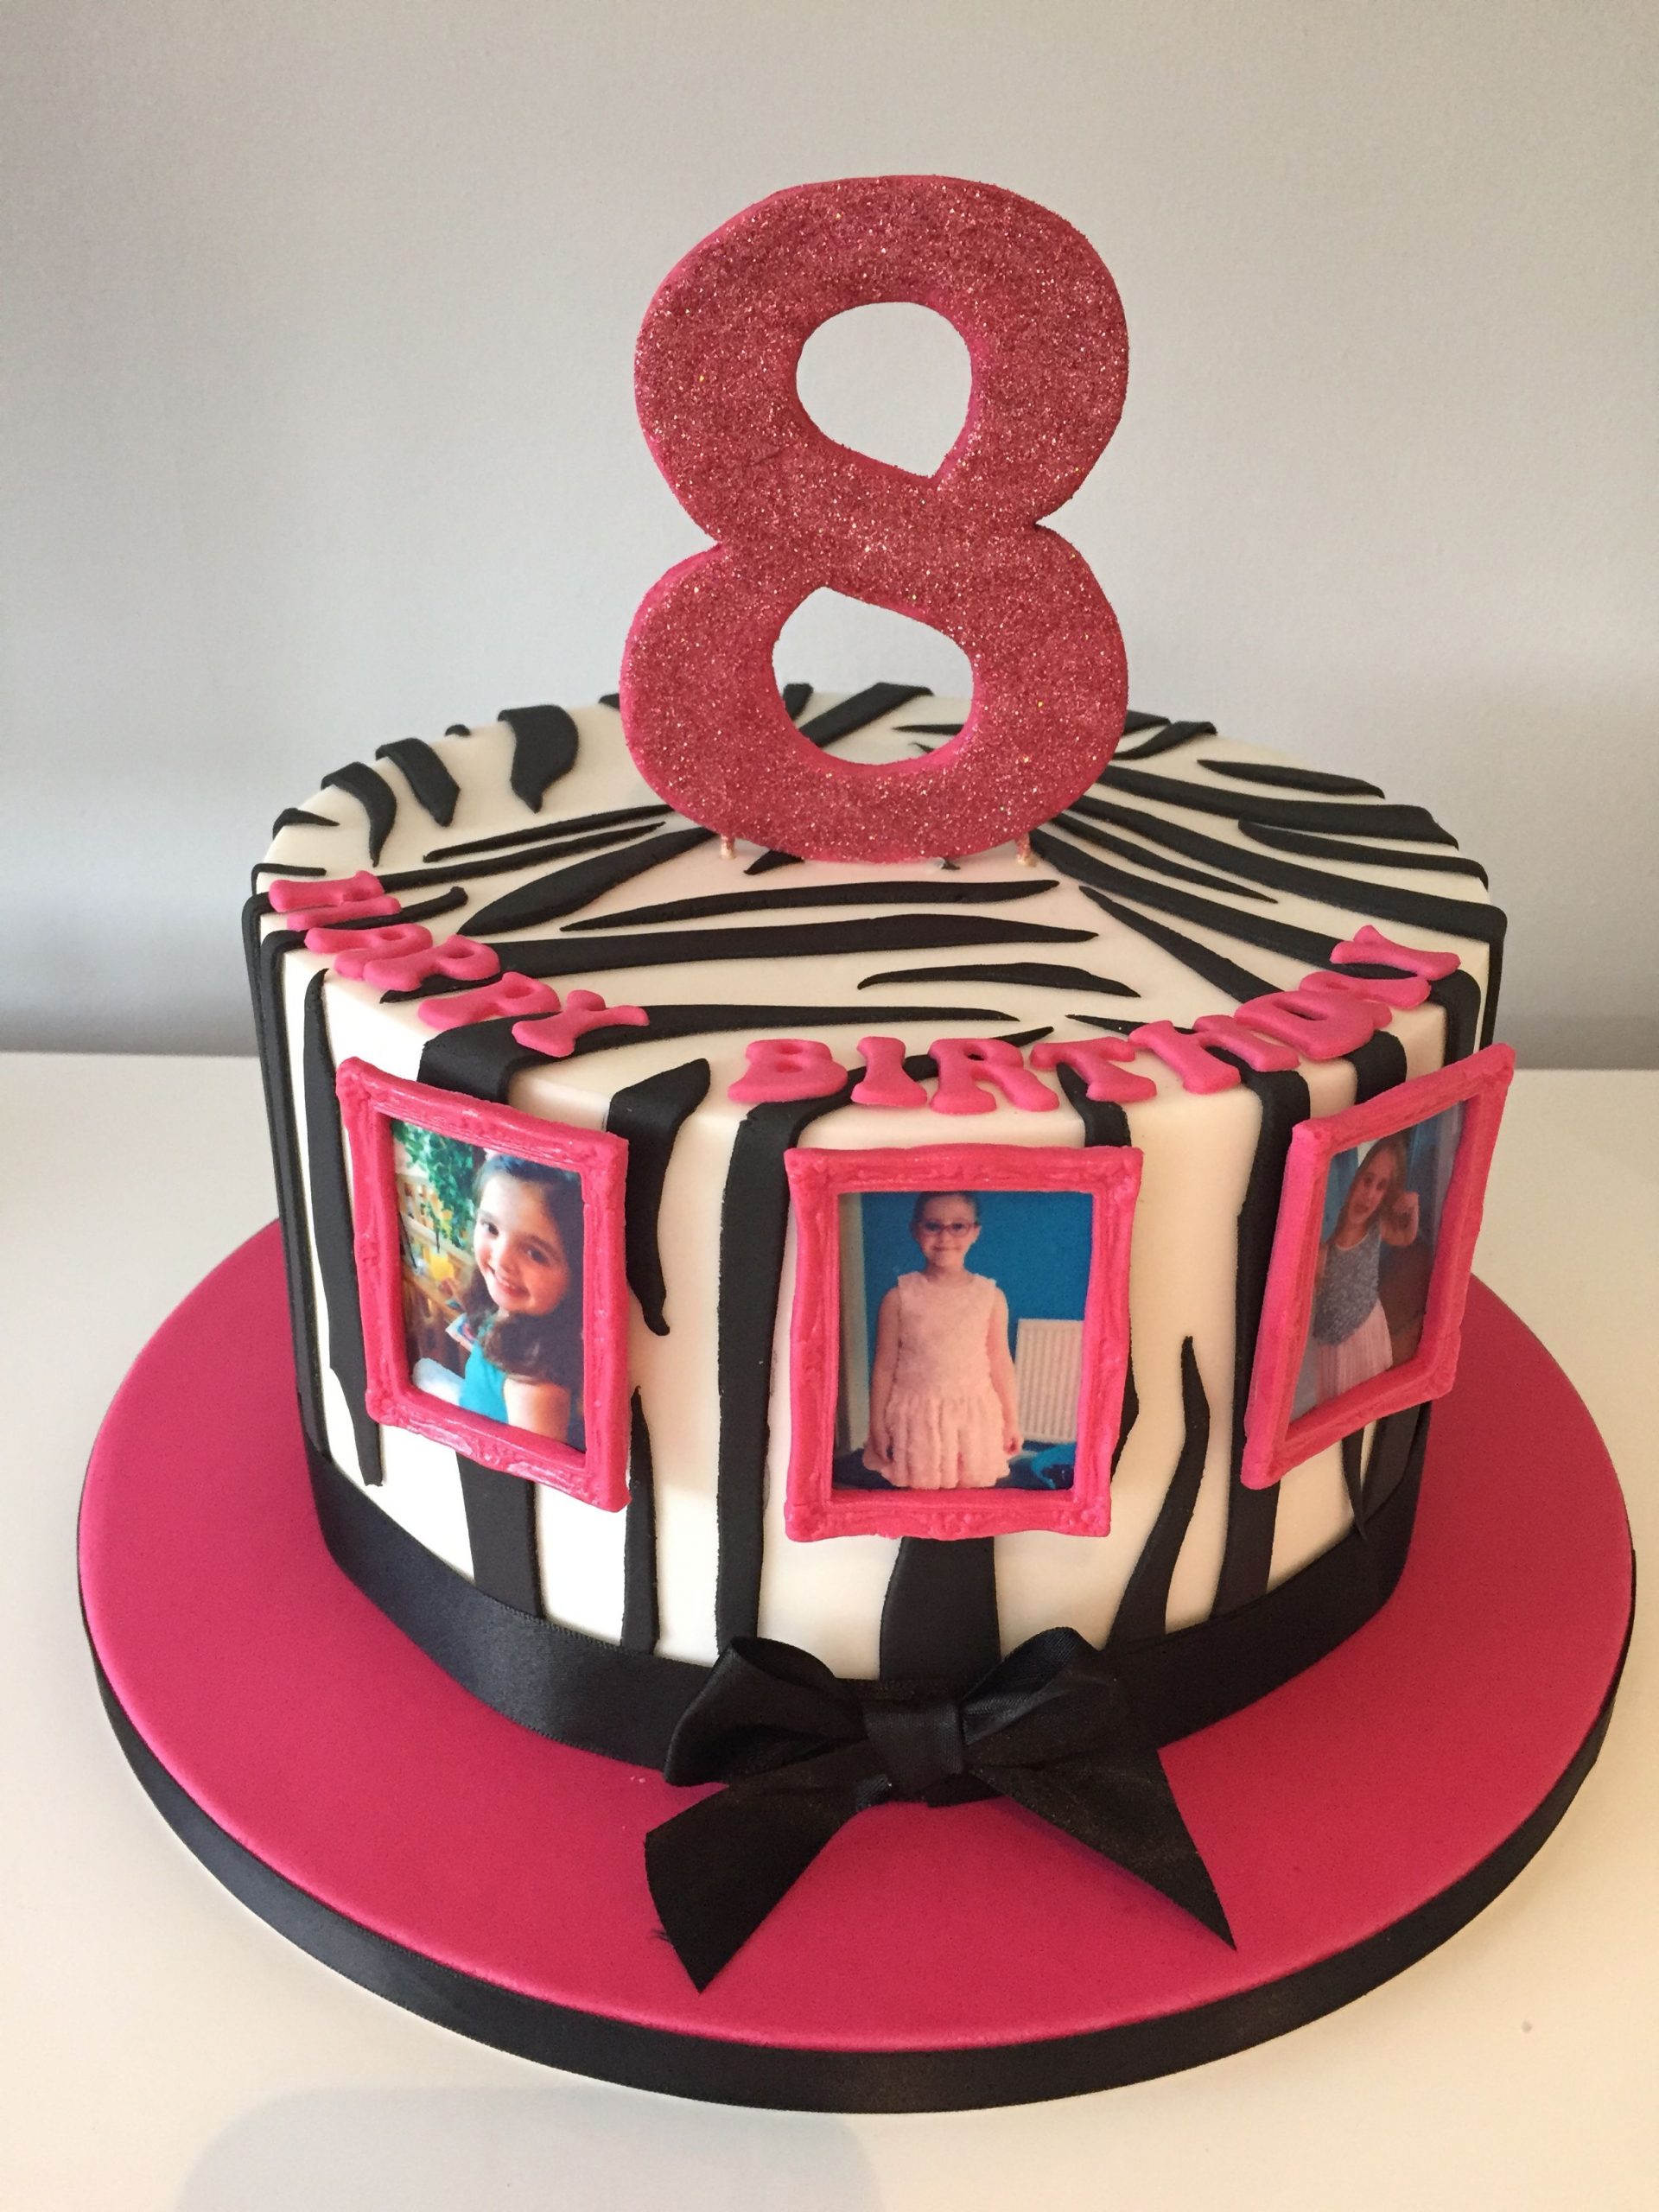 Girly zebra print cake with edible pictures in edible frames.